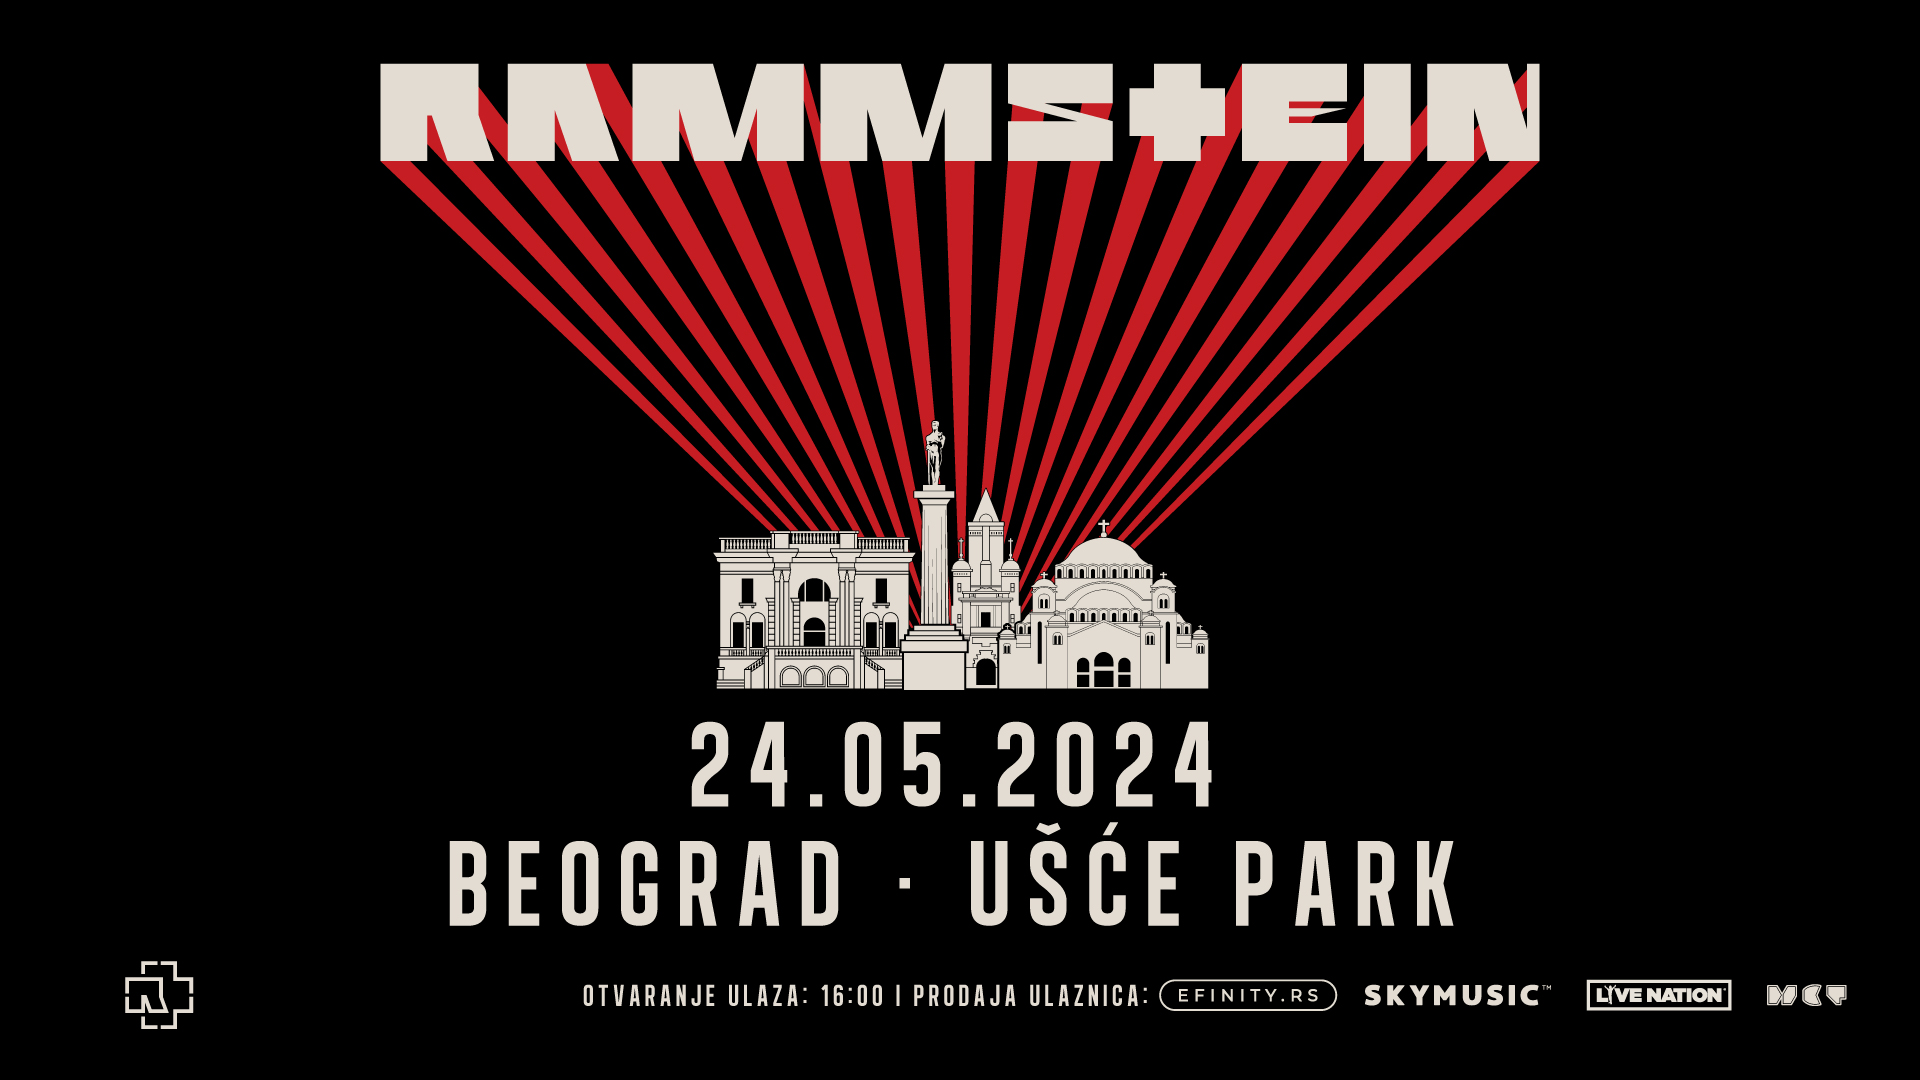 Rammstein tickets on sale today - fan pit (FeuerZone) sold out!